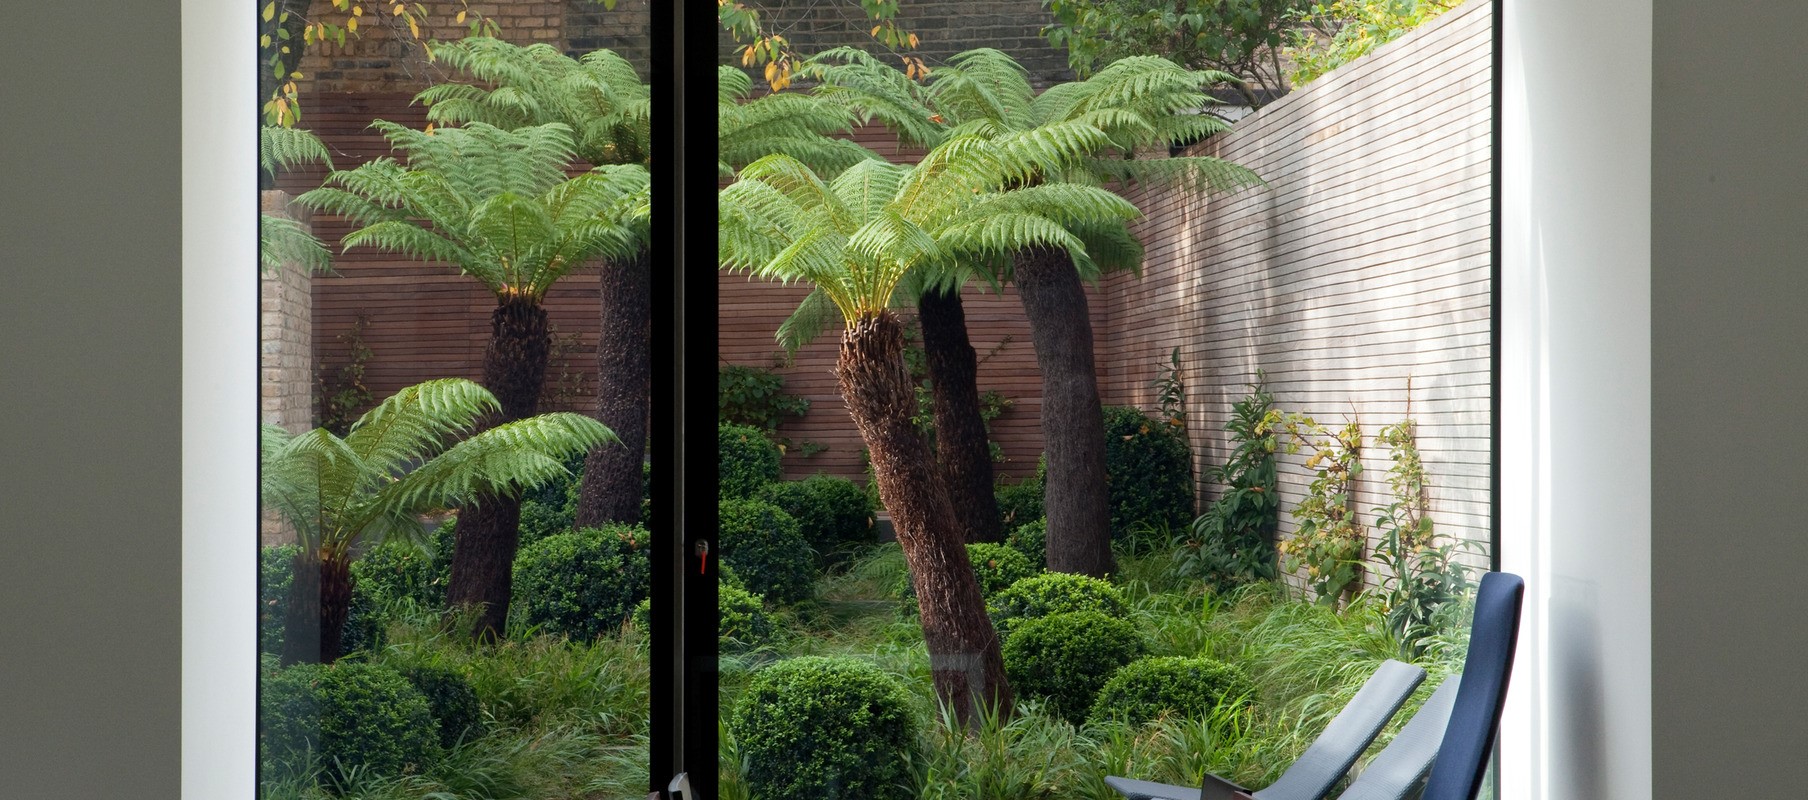 Garden with palm trees pictured from inside